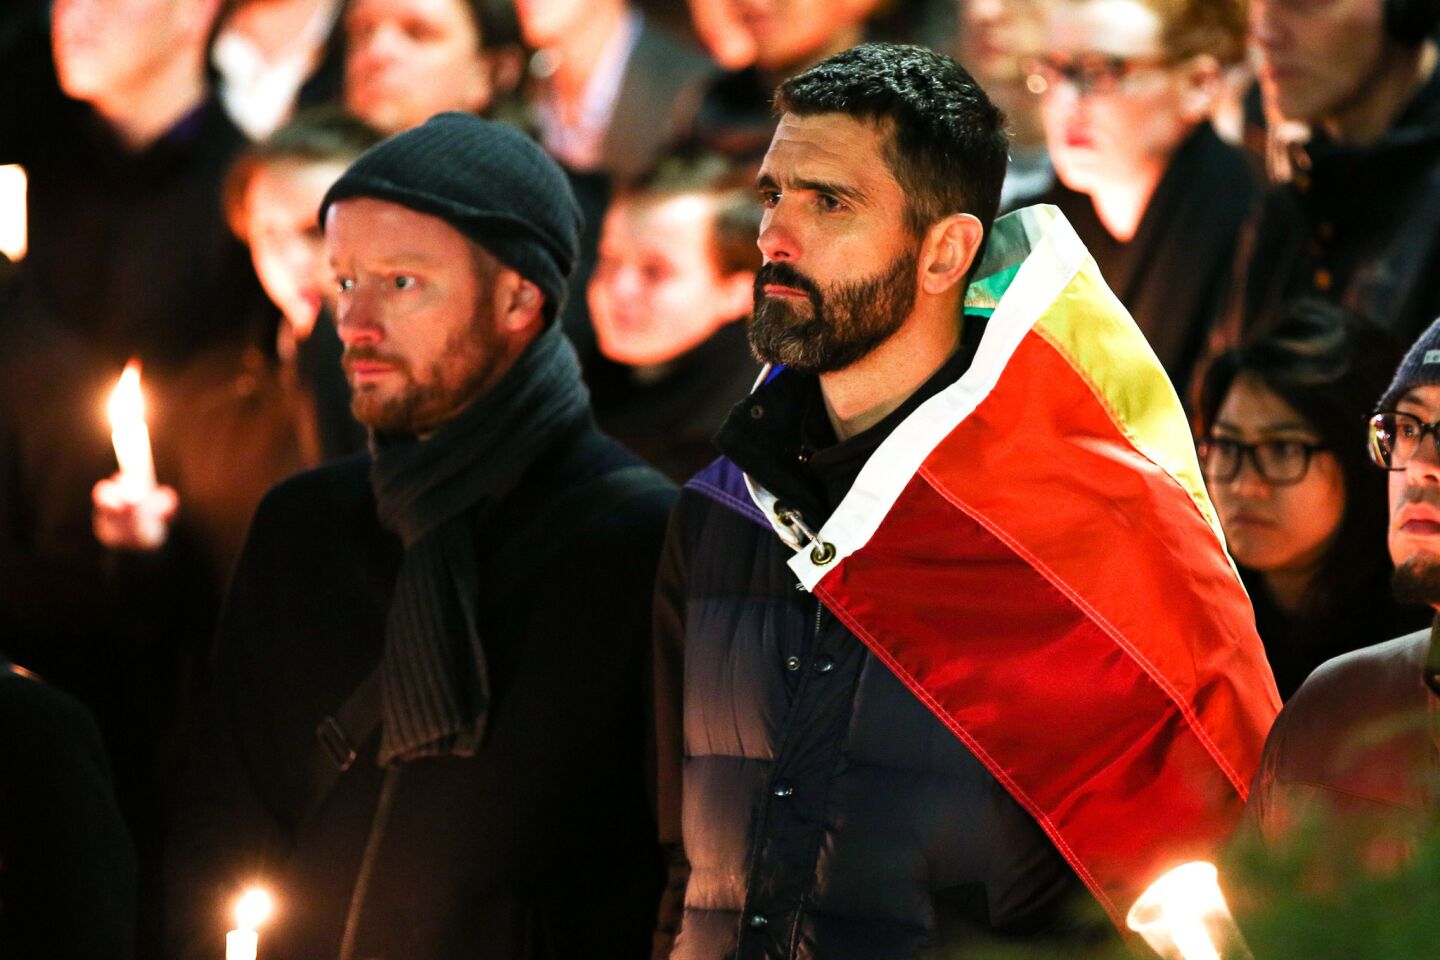 New Zealand residents gather in Frank Kitts Park to mourn victims of the Orlando nightclub shooting.